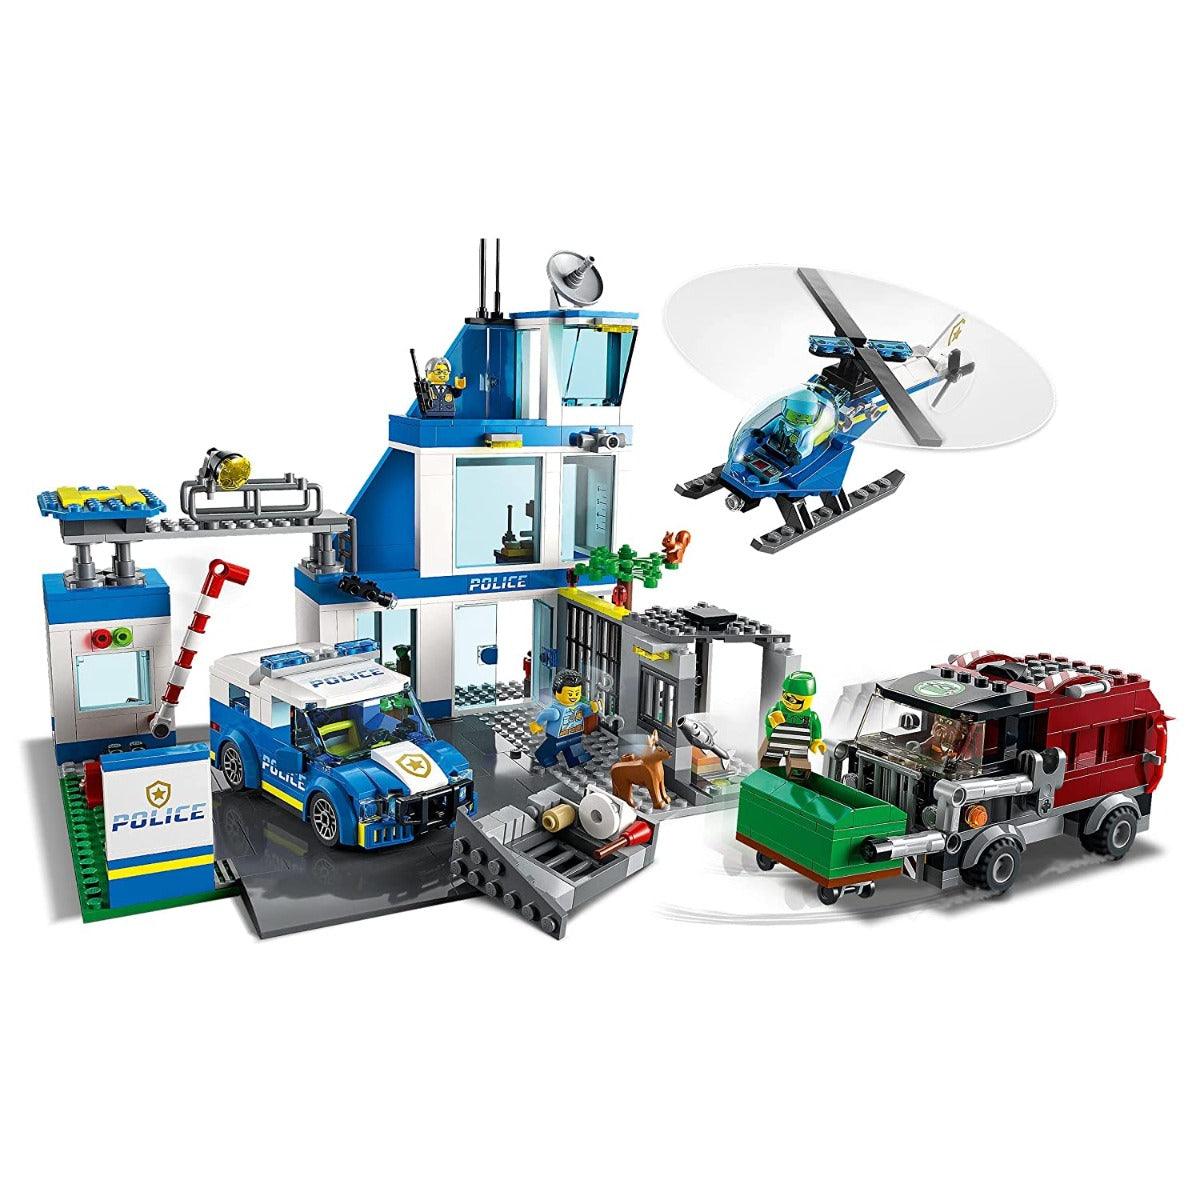 LEGO City Police Station Building Kit for Ages 6+